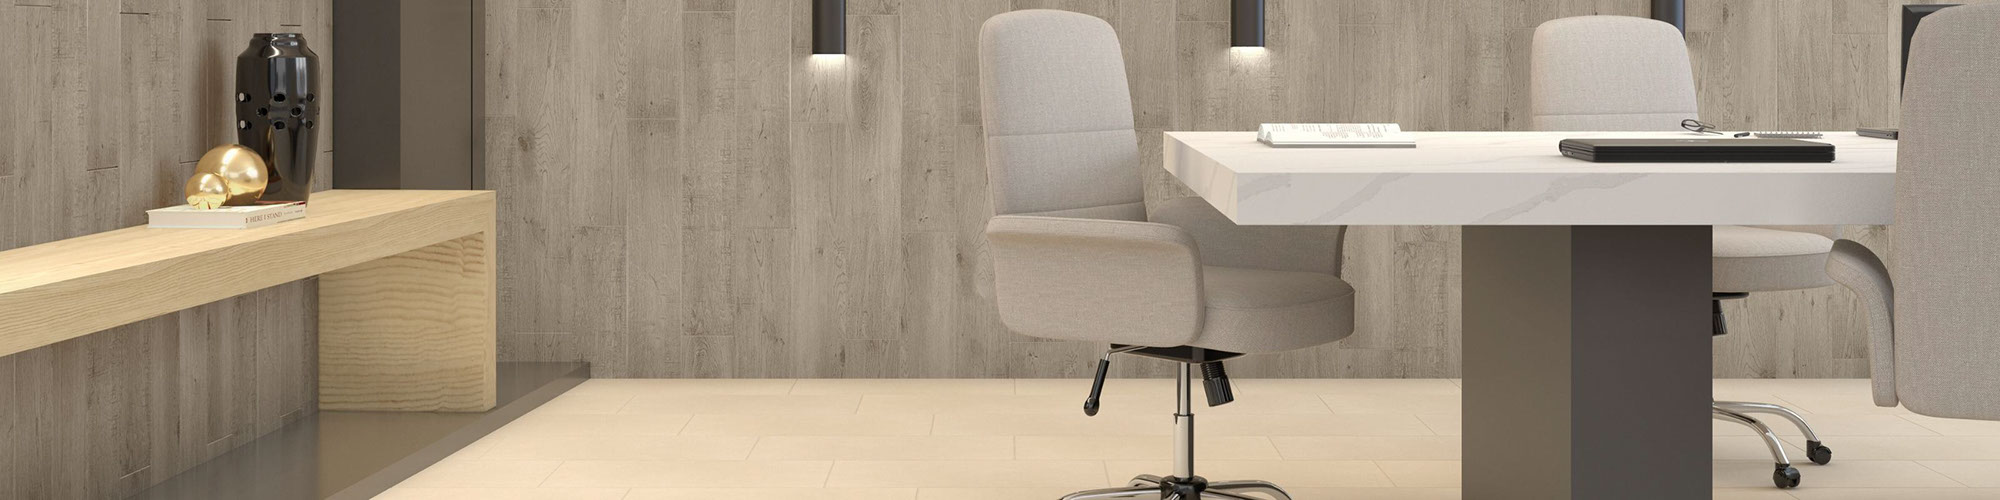 Conference room with beige floor tile, wall tile that looks like weathered wood, wall-mounted lighting, side table, white marble-top table and gray rolling chairs.